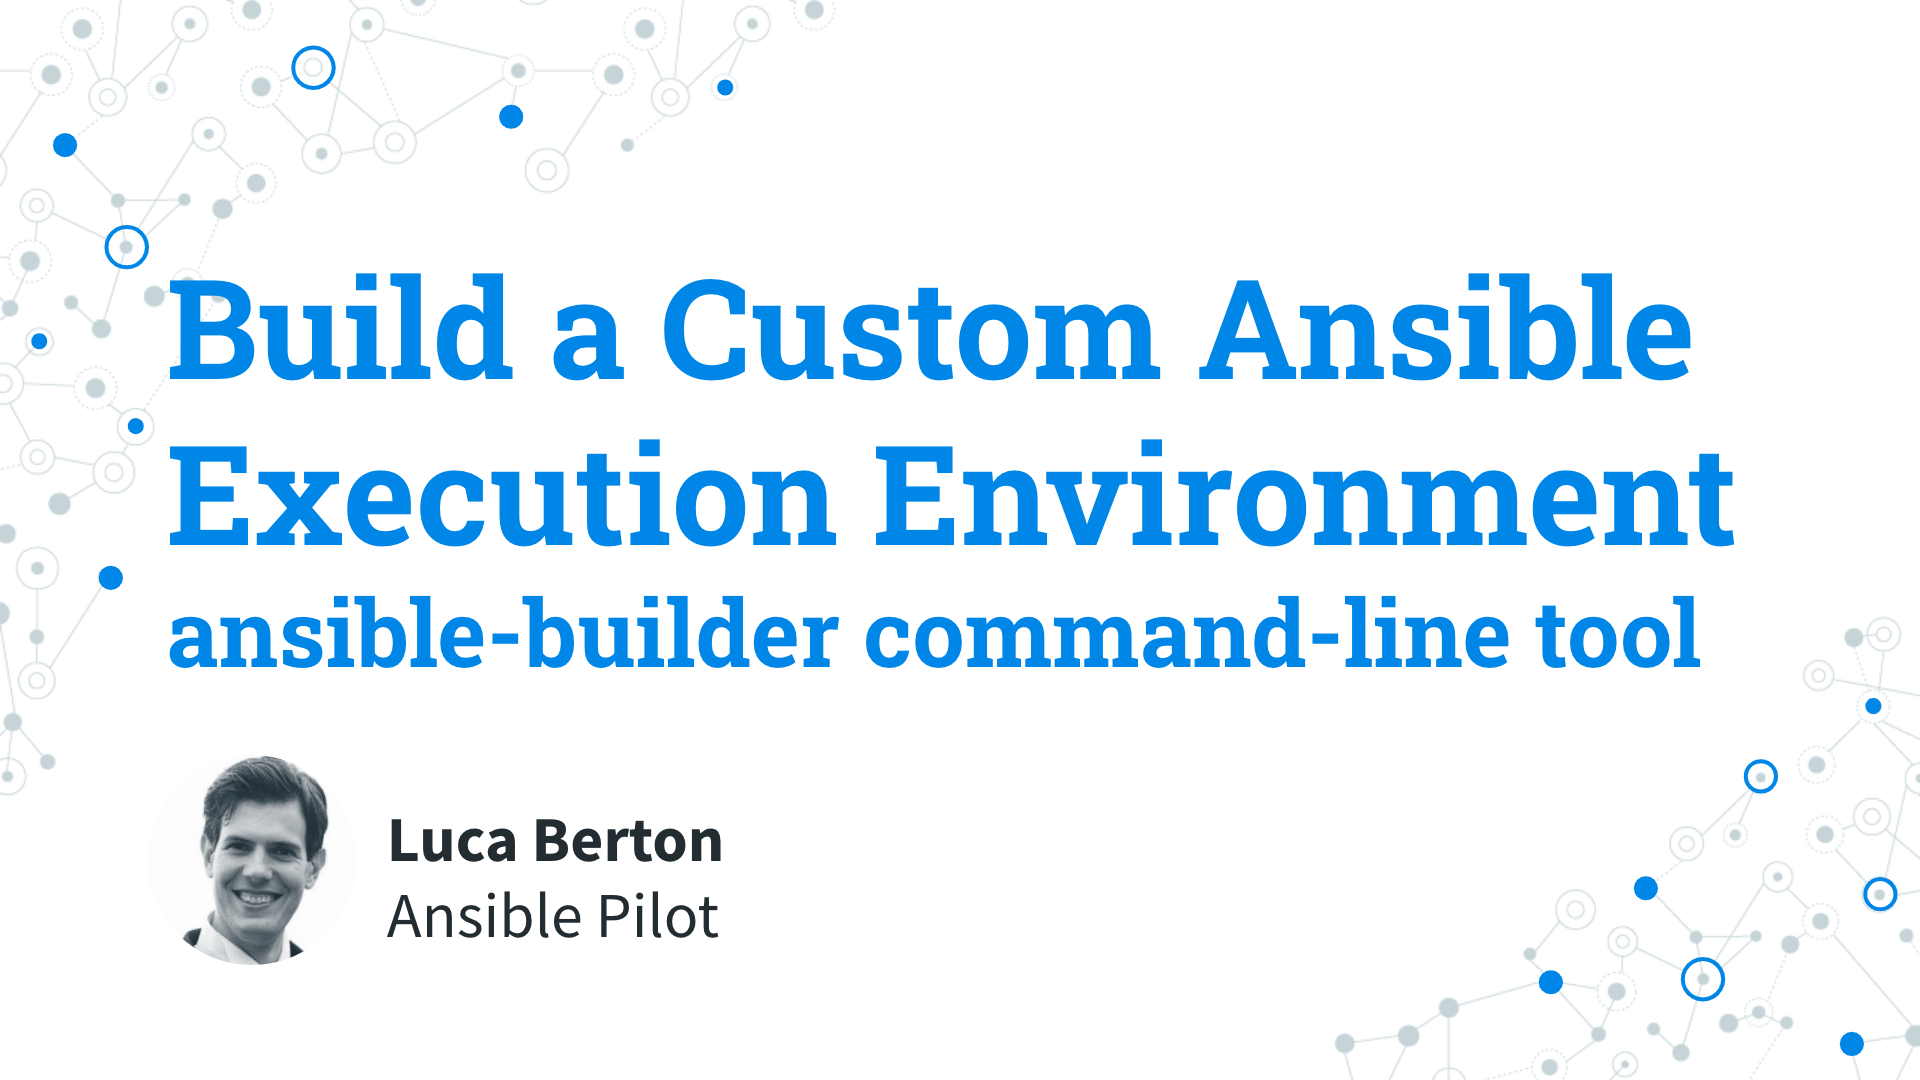 Build a Custom Ansible Execution Environment - ansible-builder command-line tool